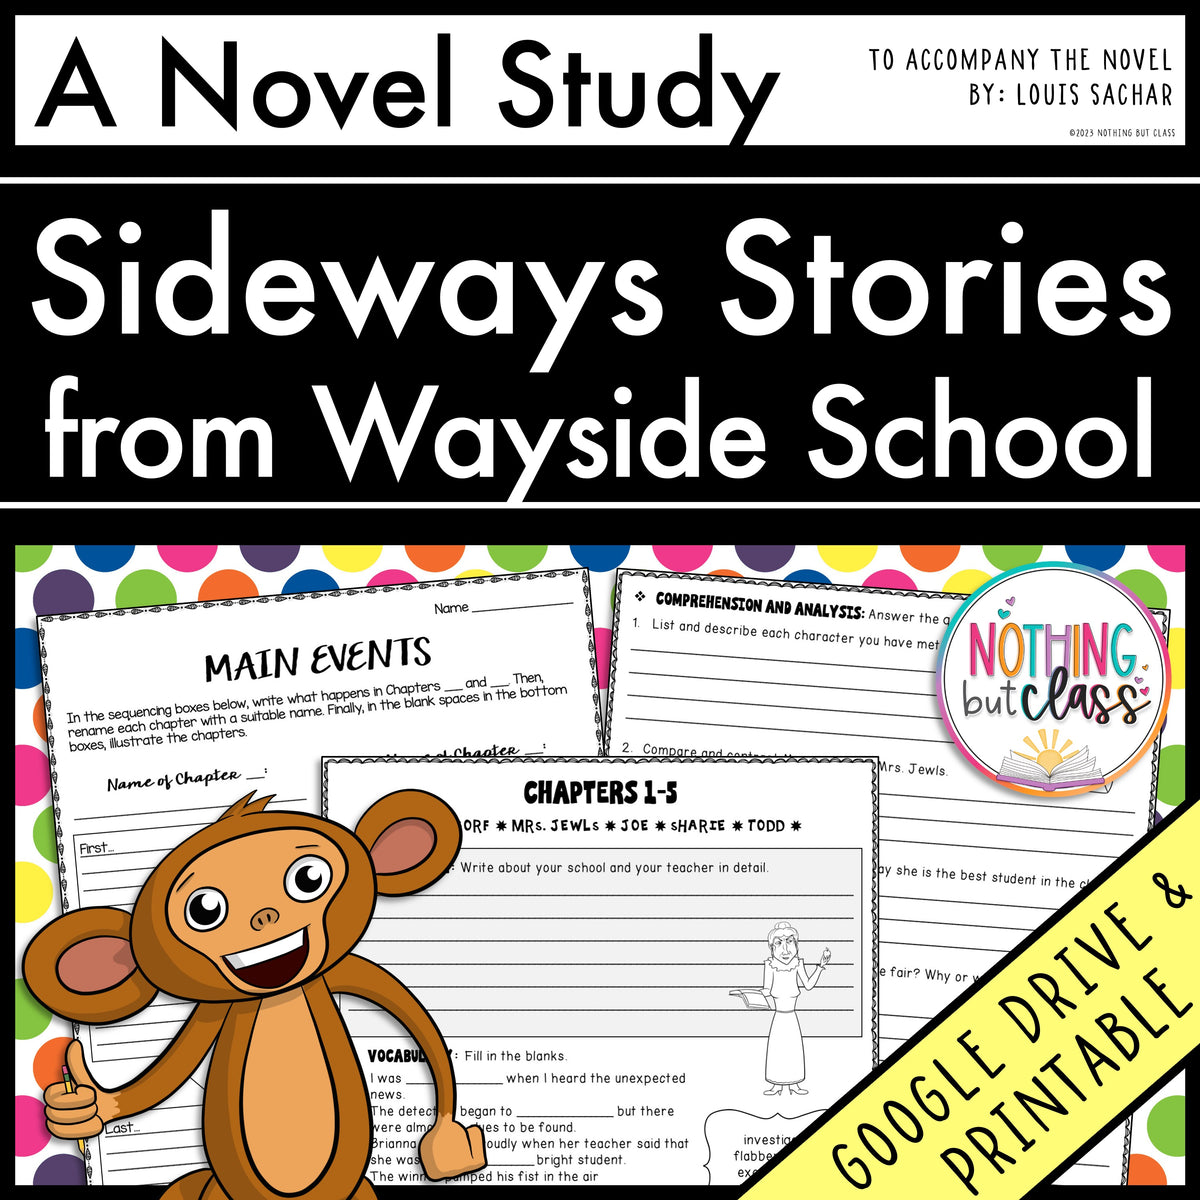 Sideways Stories from Wayside School (Louis Sachar) Novel Study (30 pages)